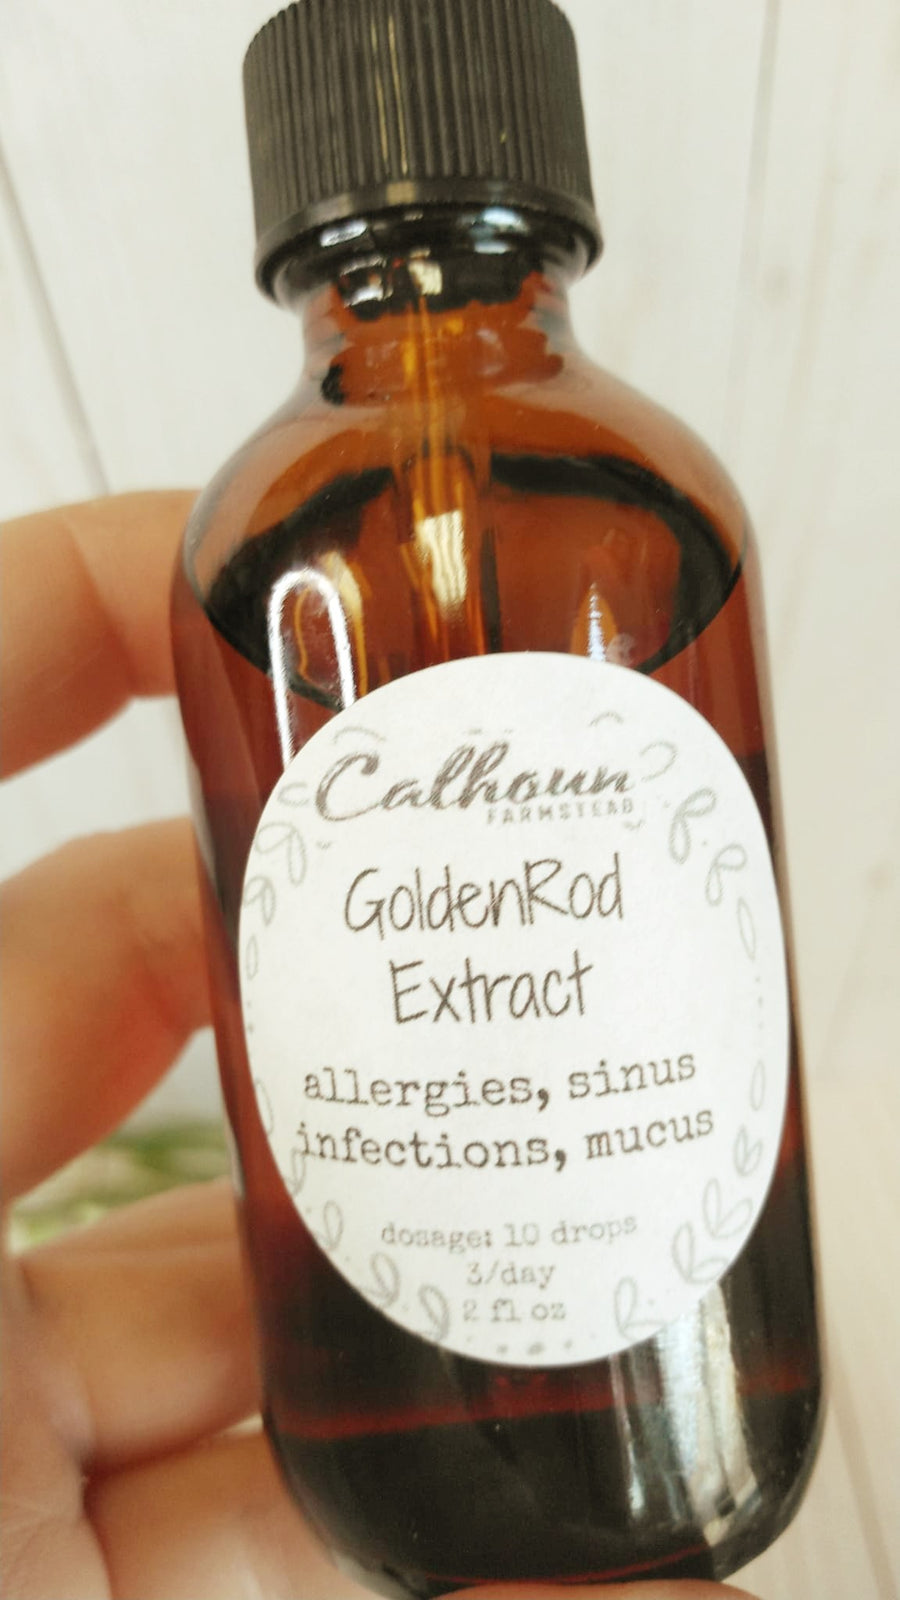 Goldenrod Extract - Allergies